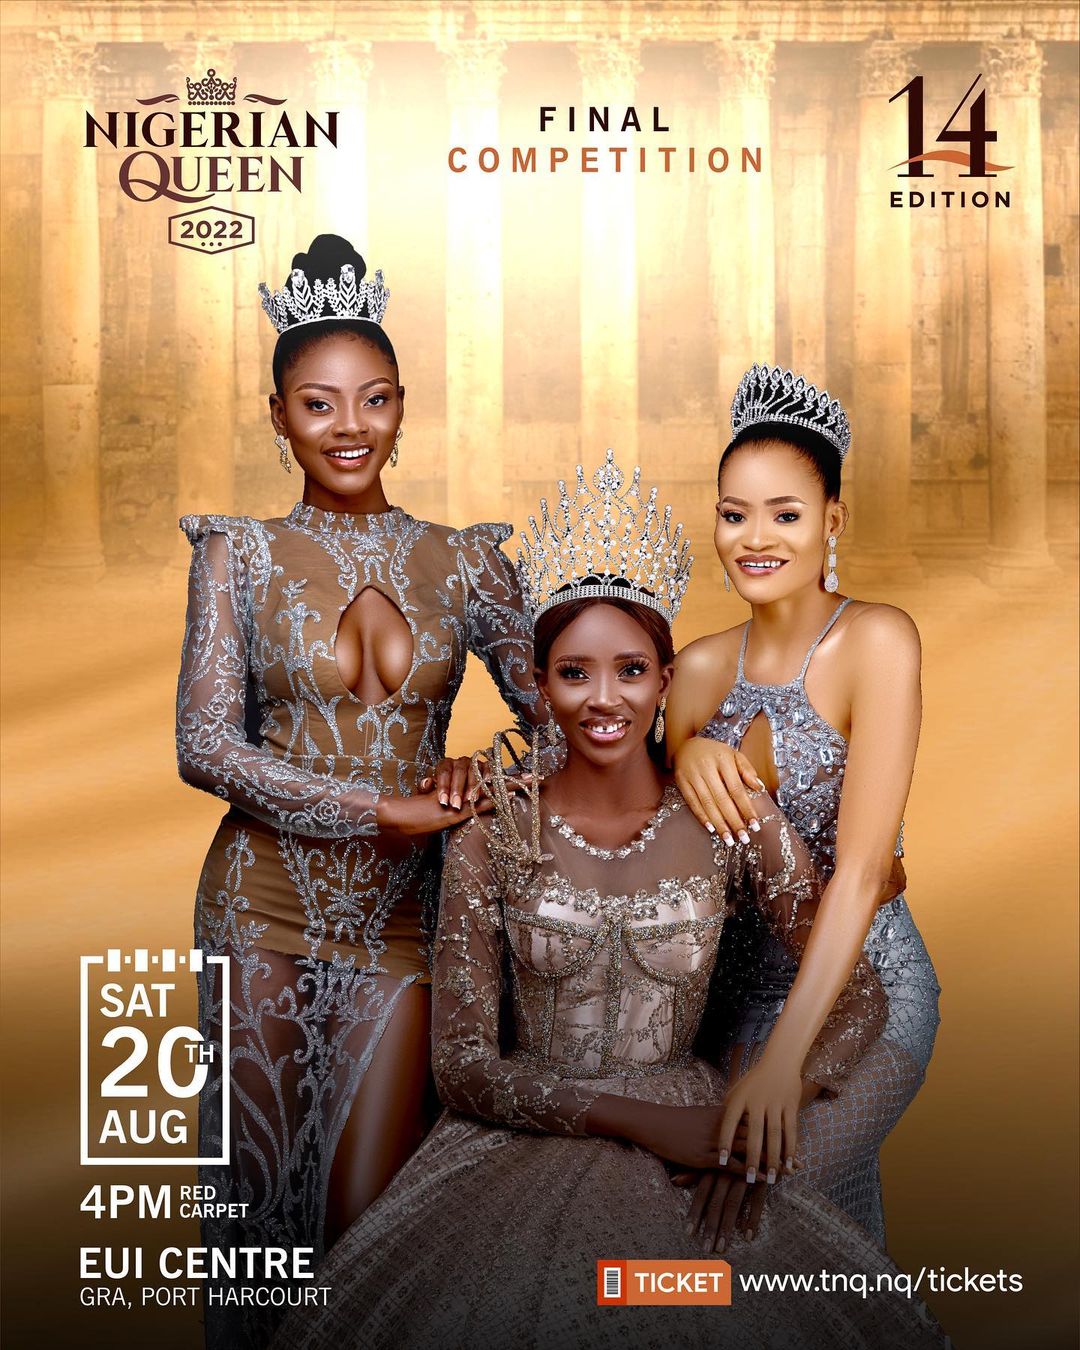 Nigerian Queen 2022: What to expect in the 14th edition